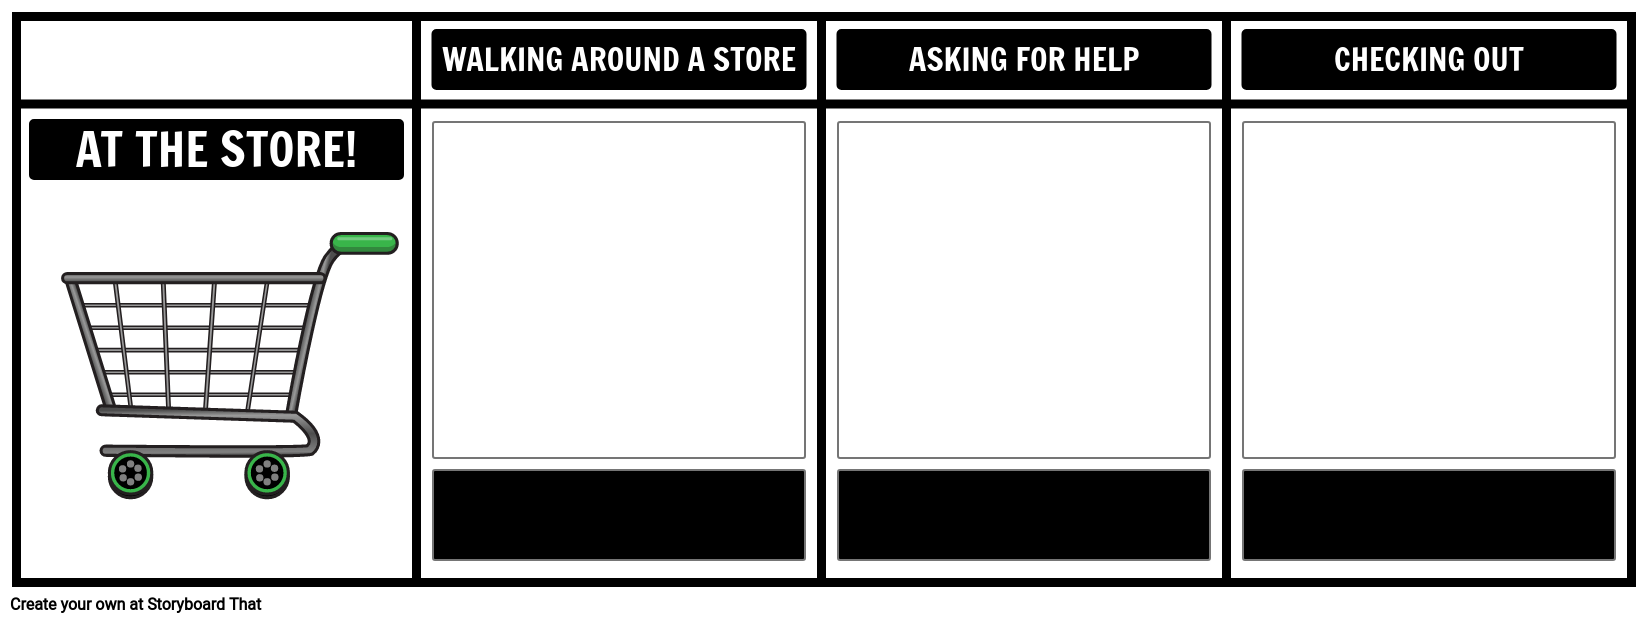 At the Store Template